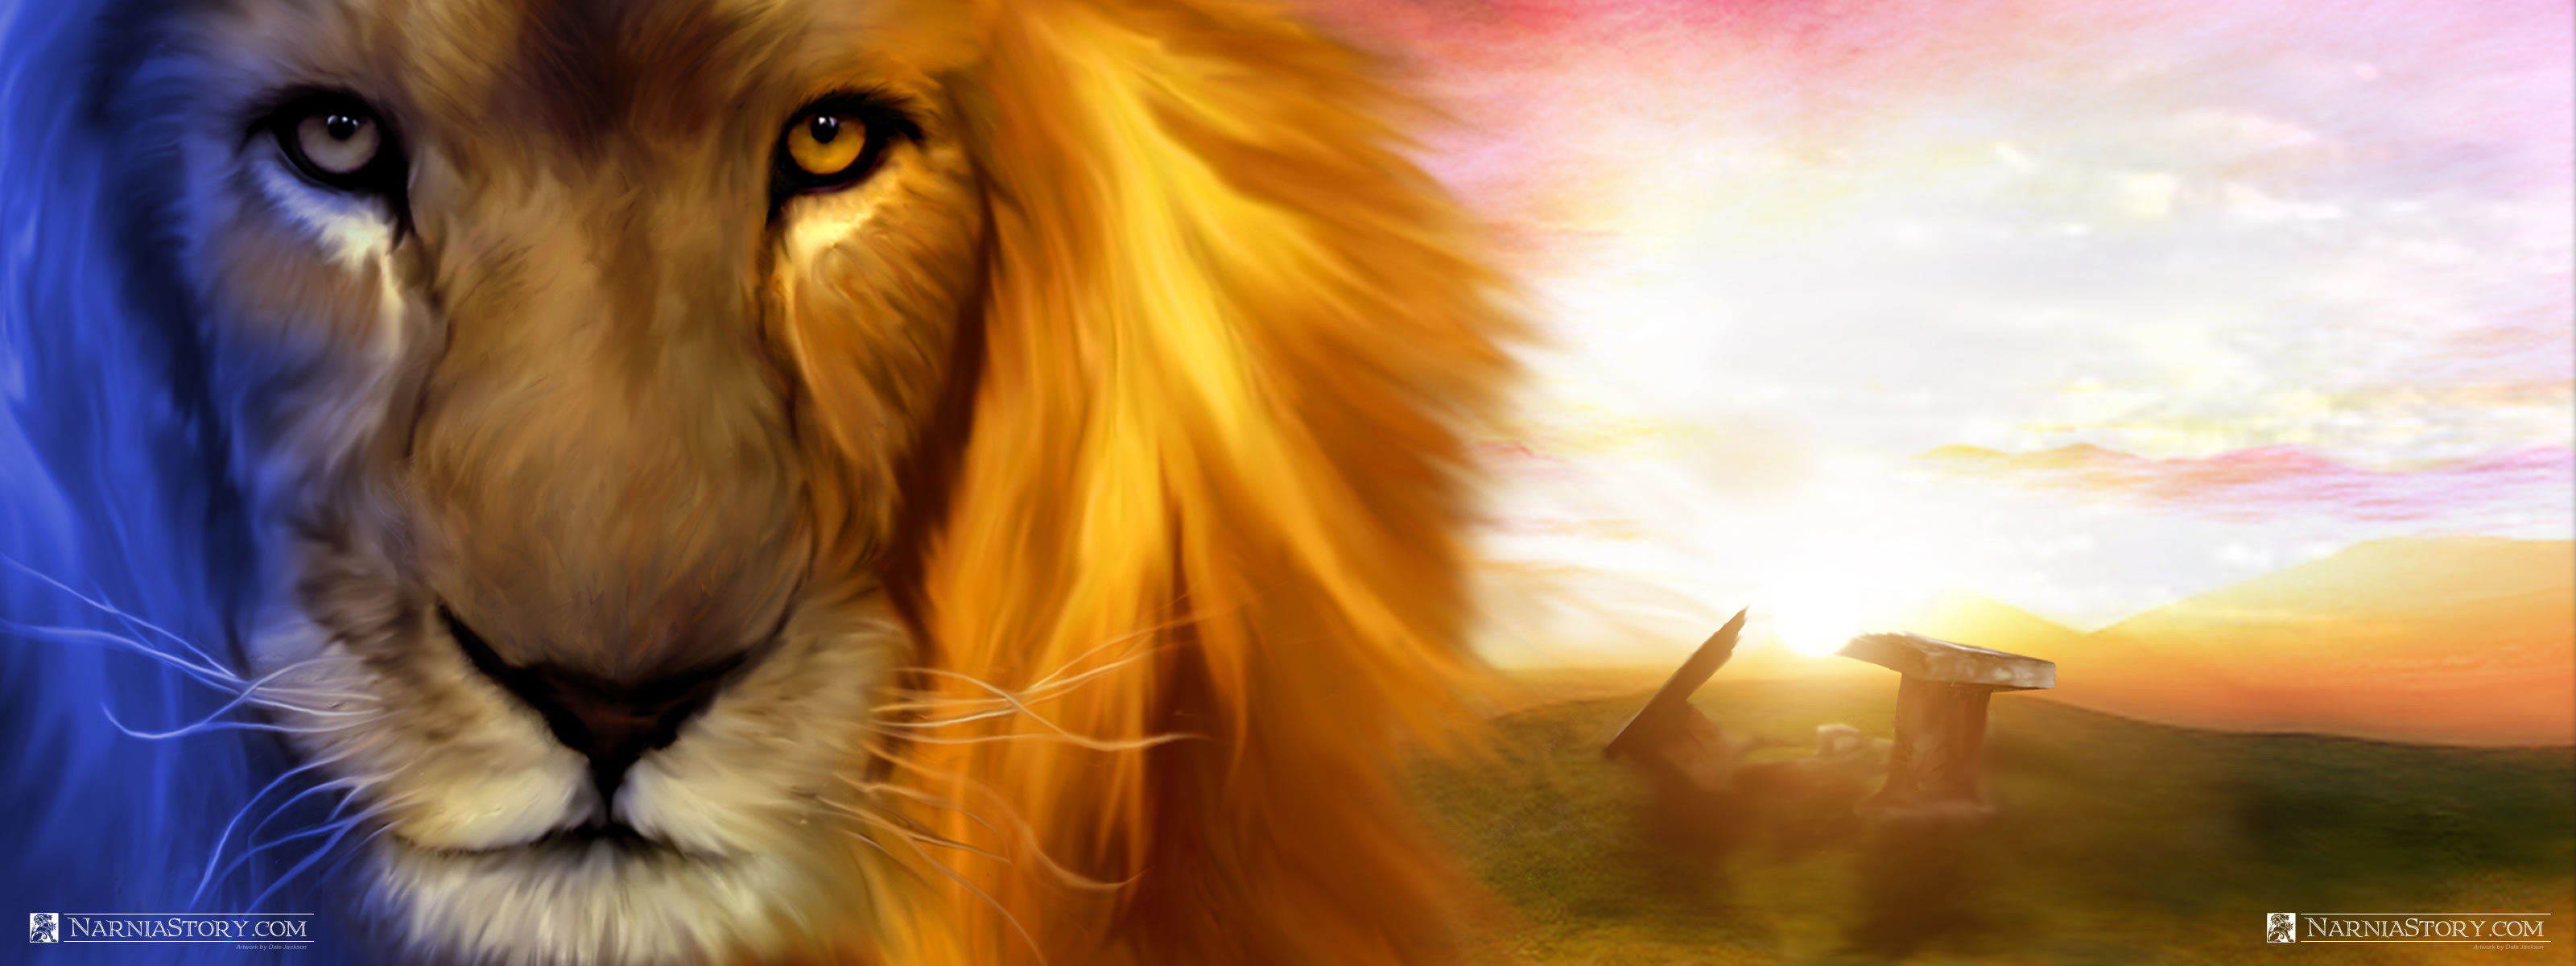 3200x1200 ... wallpaper and background the narnia story ...